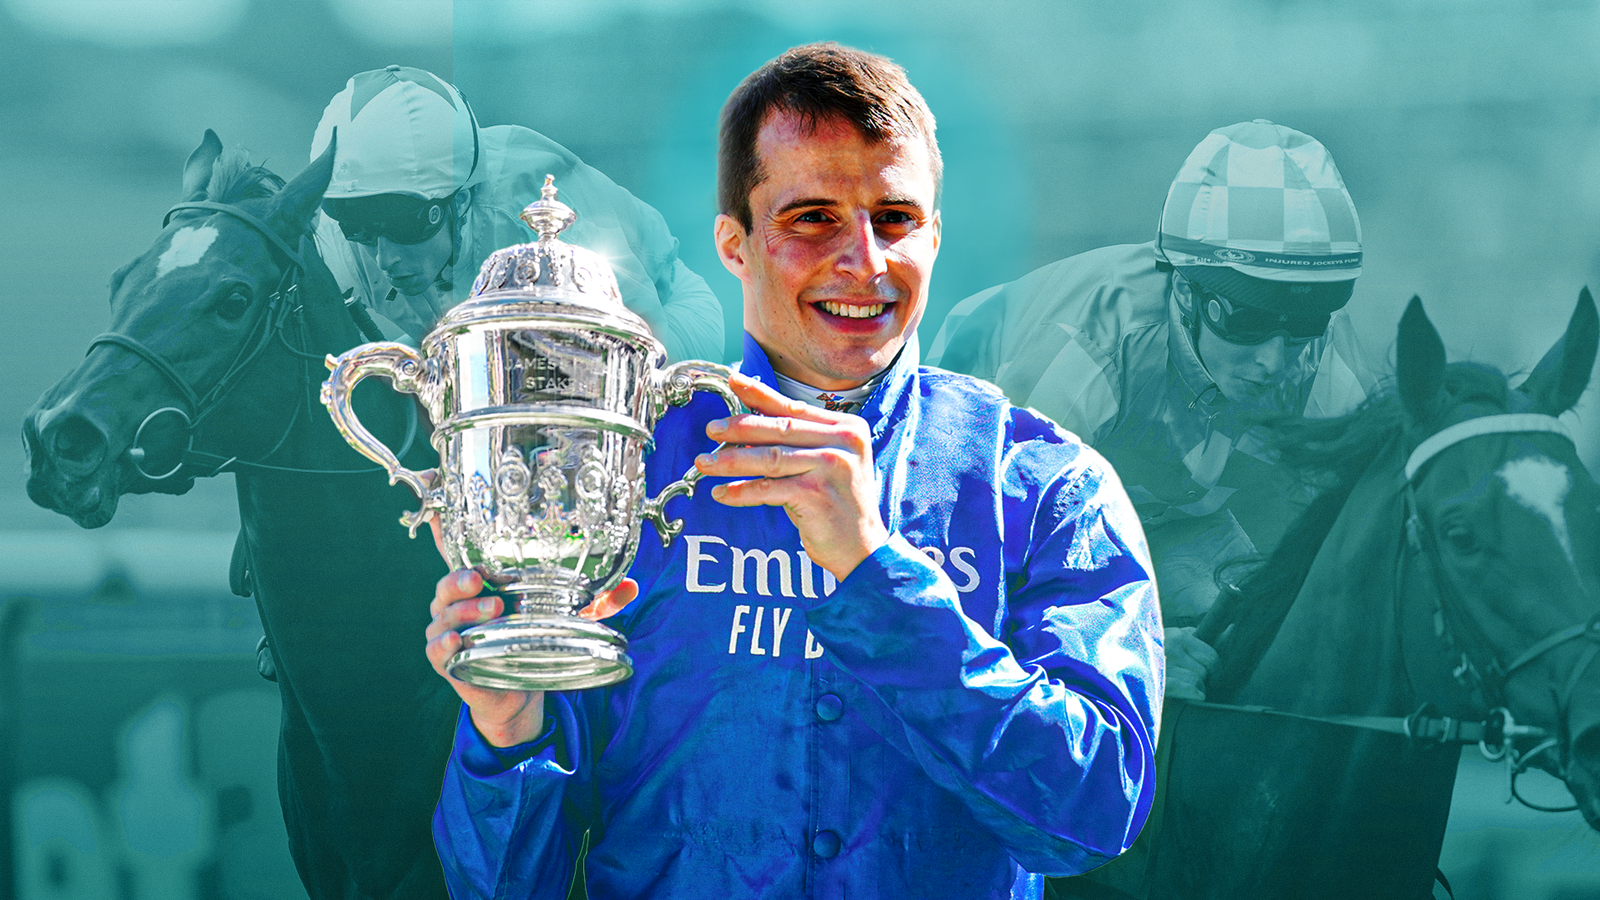 British Champions Day: William Buick set to take deserved champion jockey crown after 2021 heartbreak